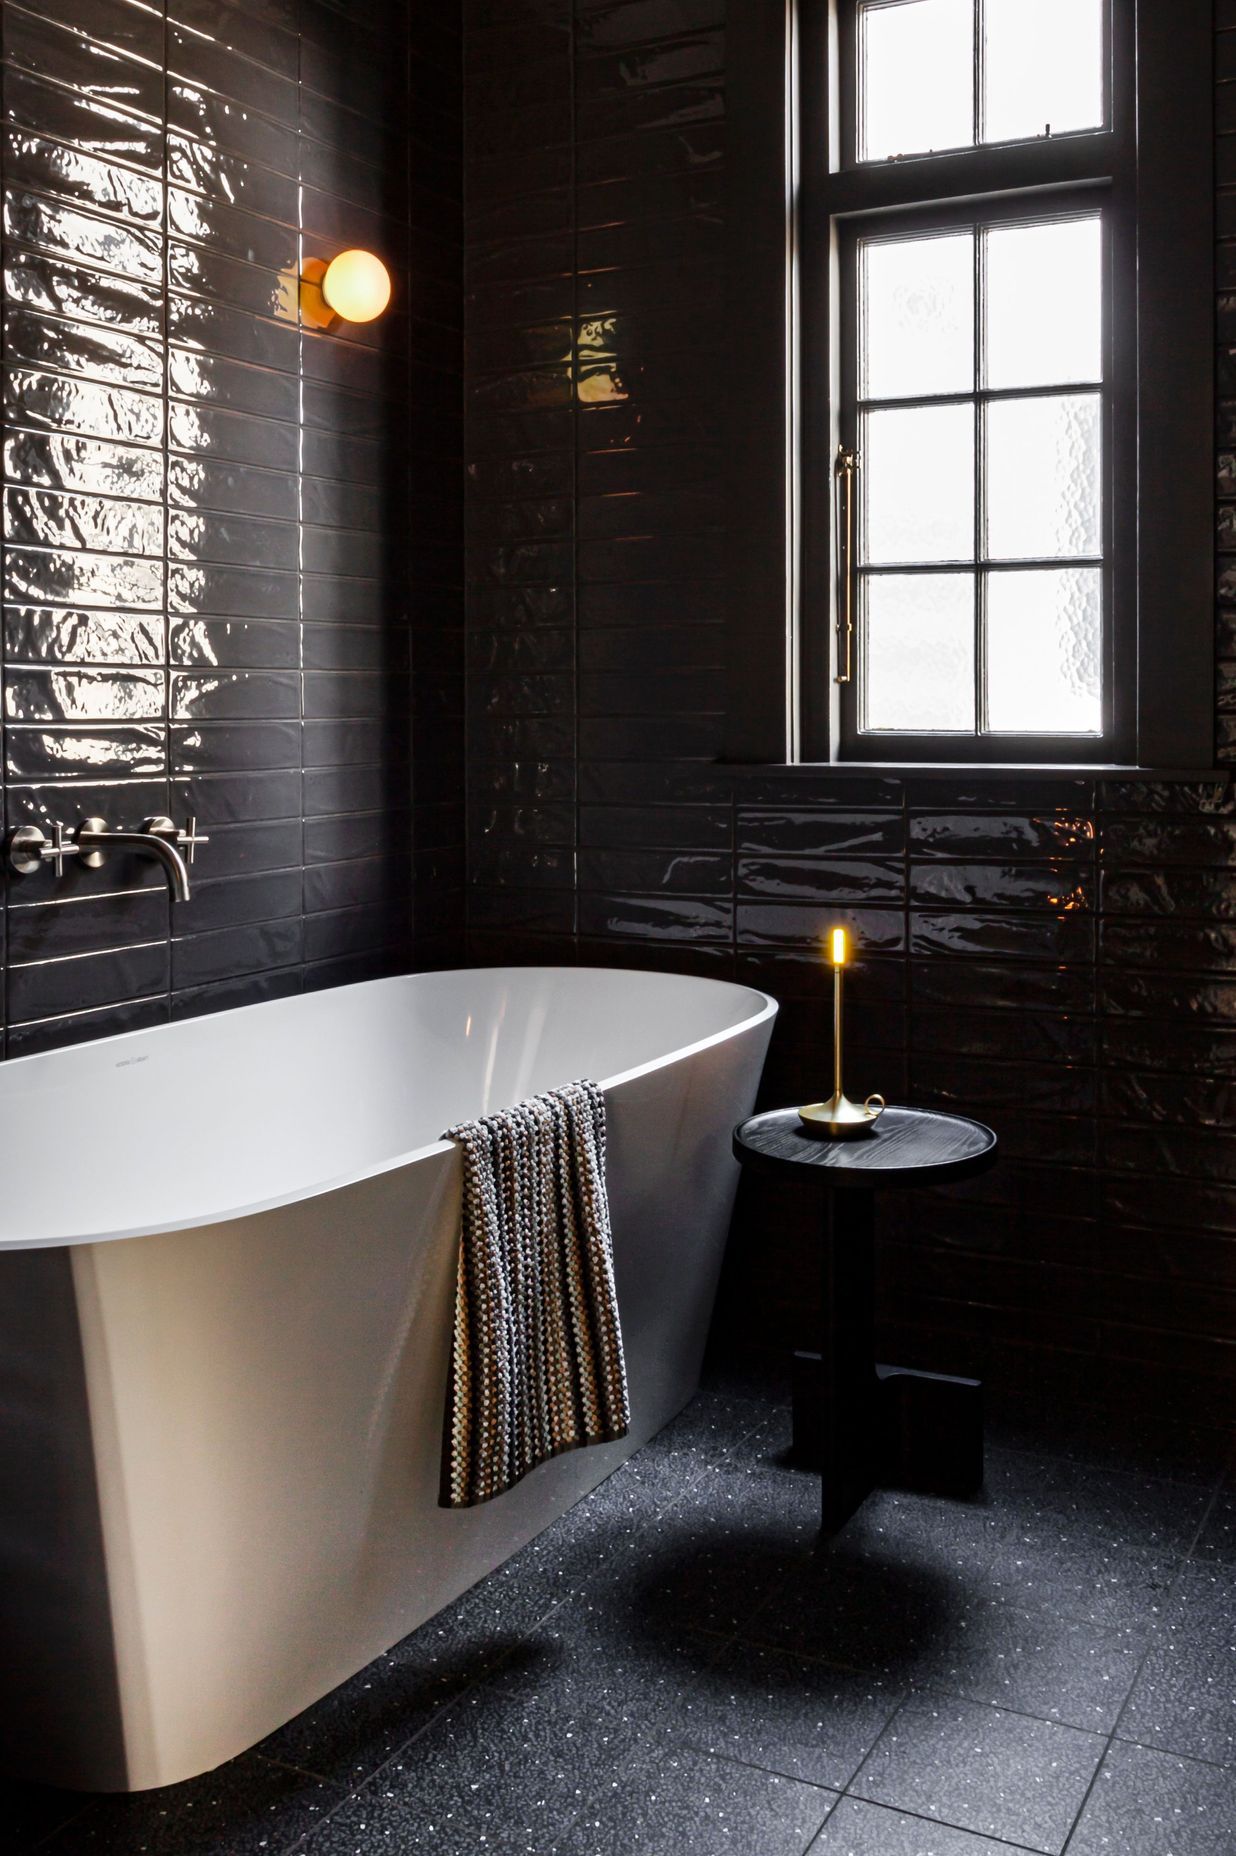 With small spaces it is actually better to play up the darkness, says Rose Schwarz of Schwarz Design. “It becomes a place of surrounding, evoking rest and relaxation.”